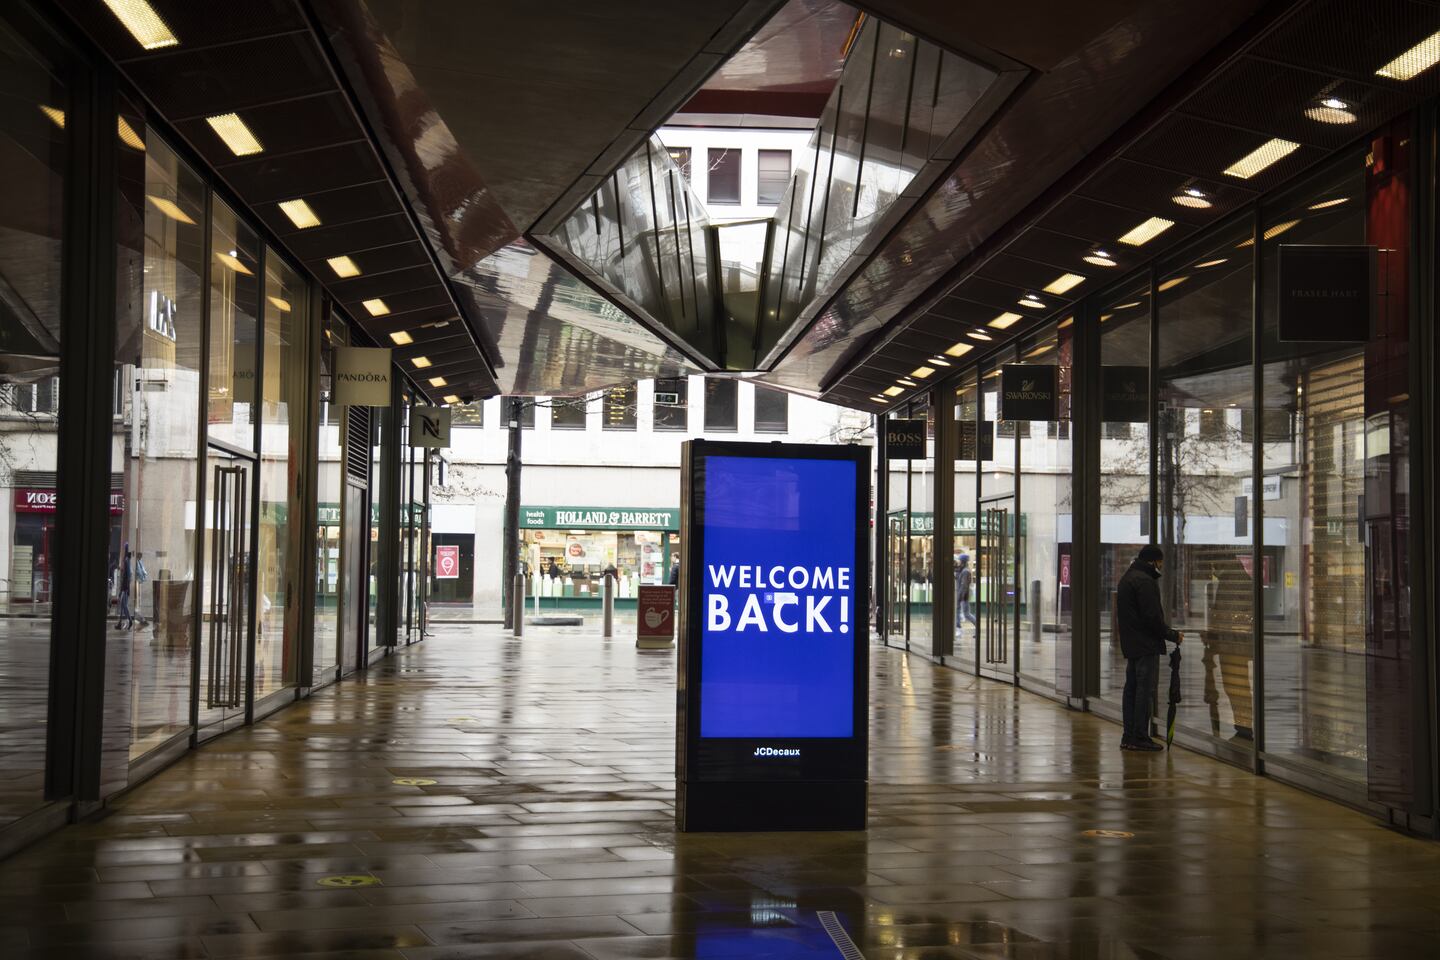 An electronic sign welcomes back shoppers in an empty mall in London on February 15. Jason Alden/Bloomberg via Getty Images.